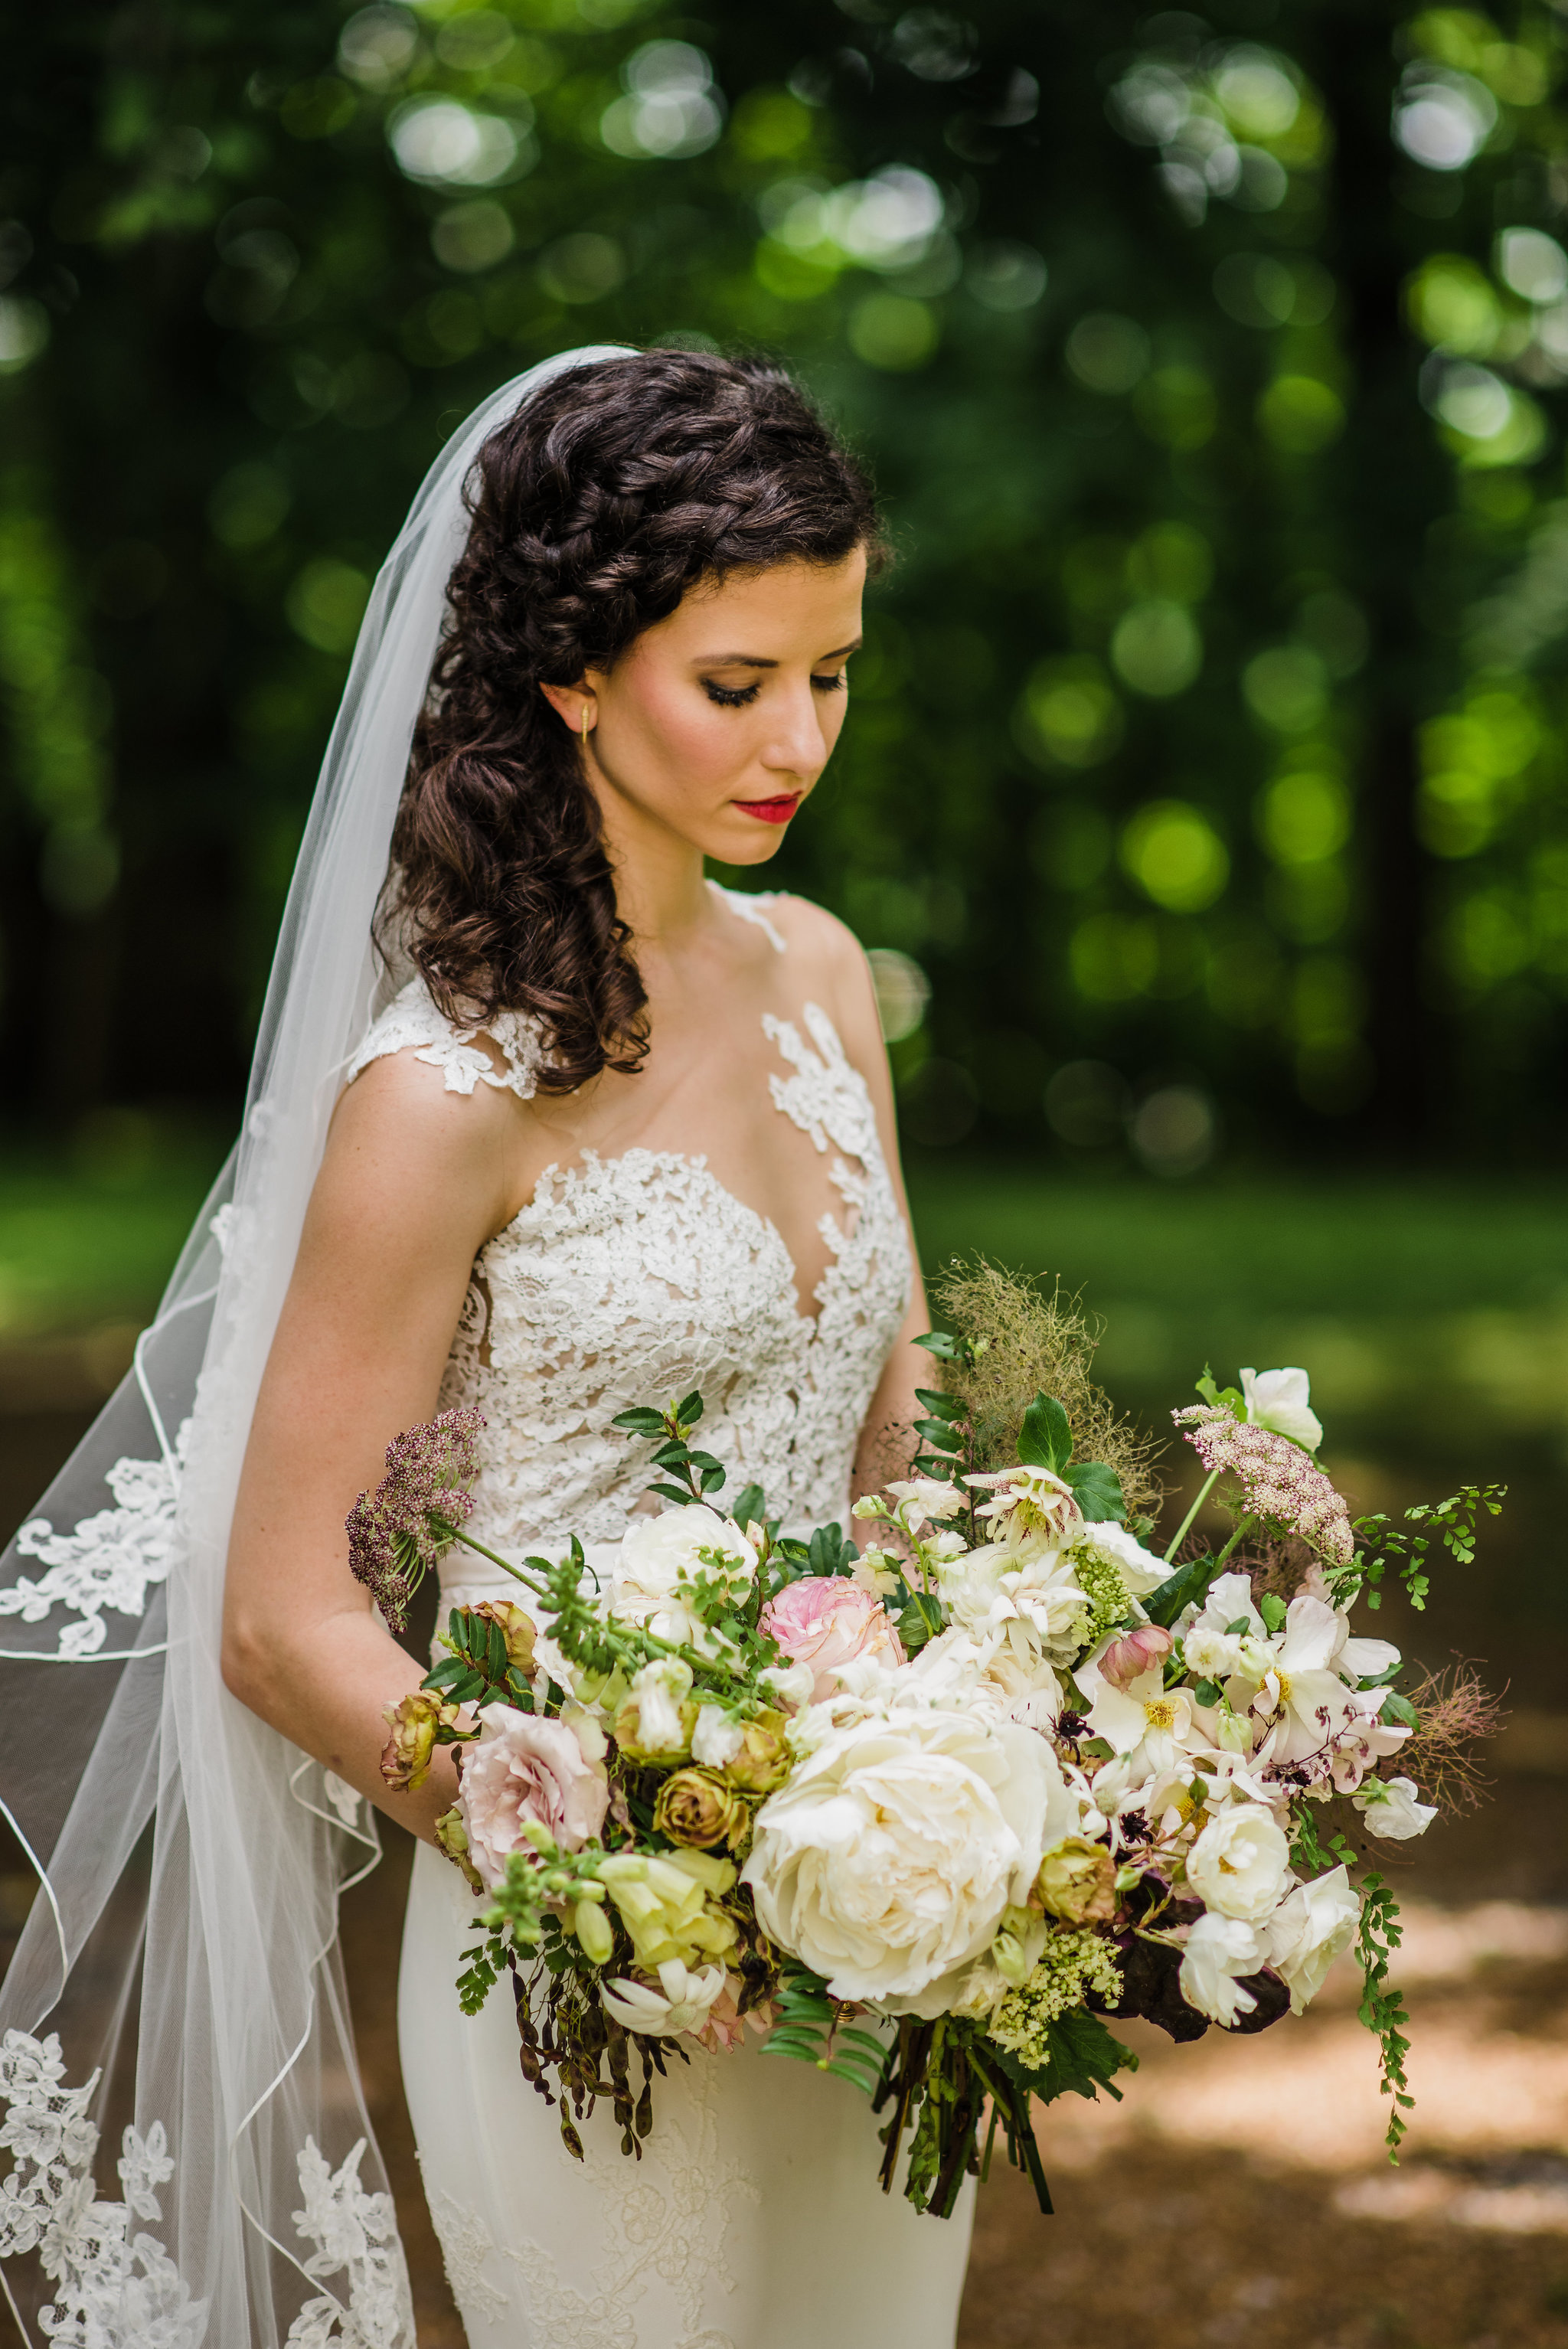 Organic, airy bridal bouquet with peonies, garden roses, greenery and lush textures // Nashville Wedding Florist